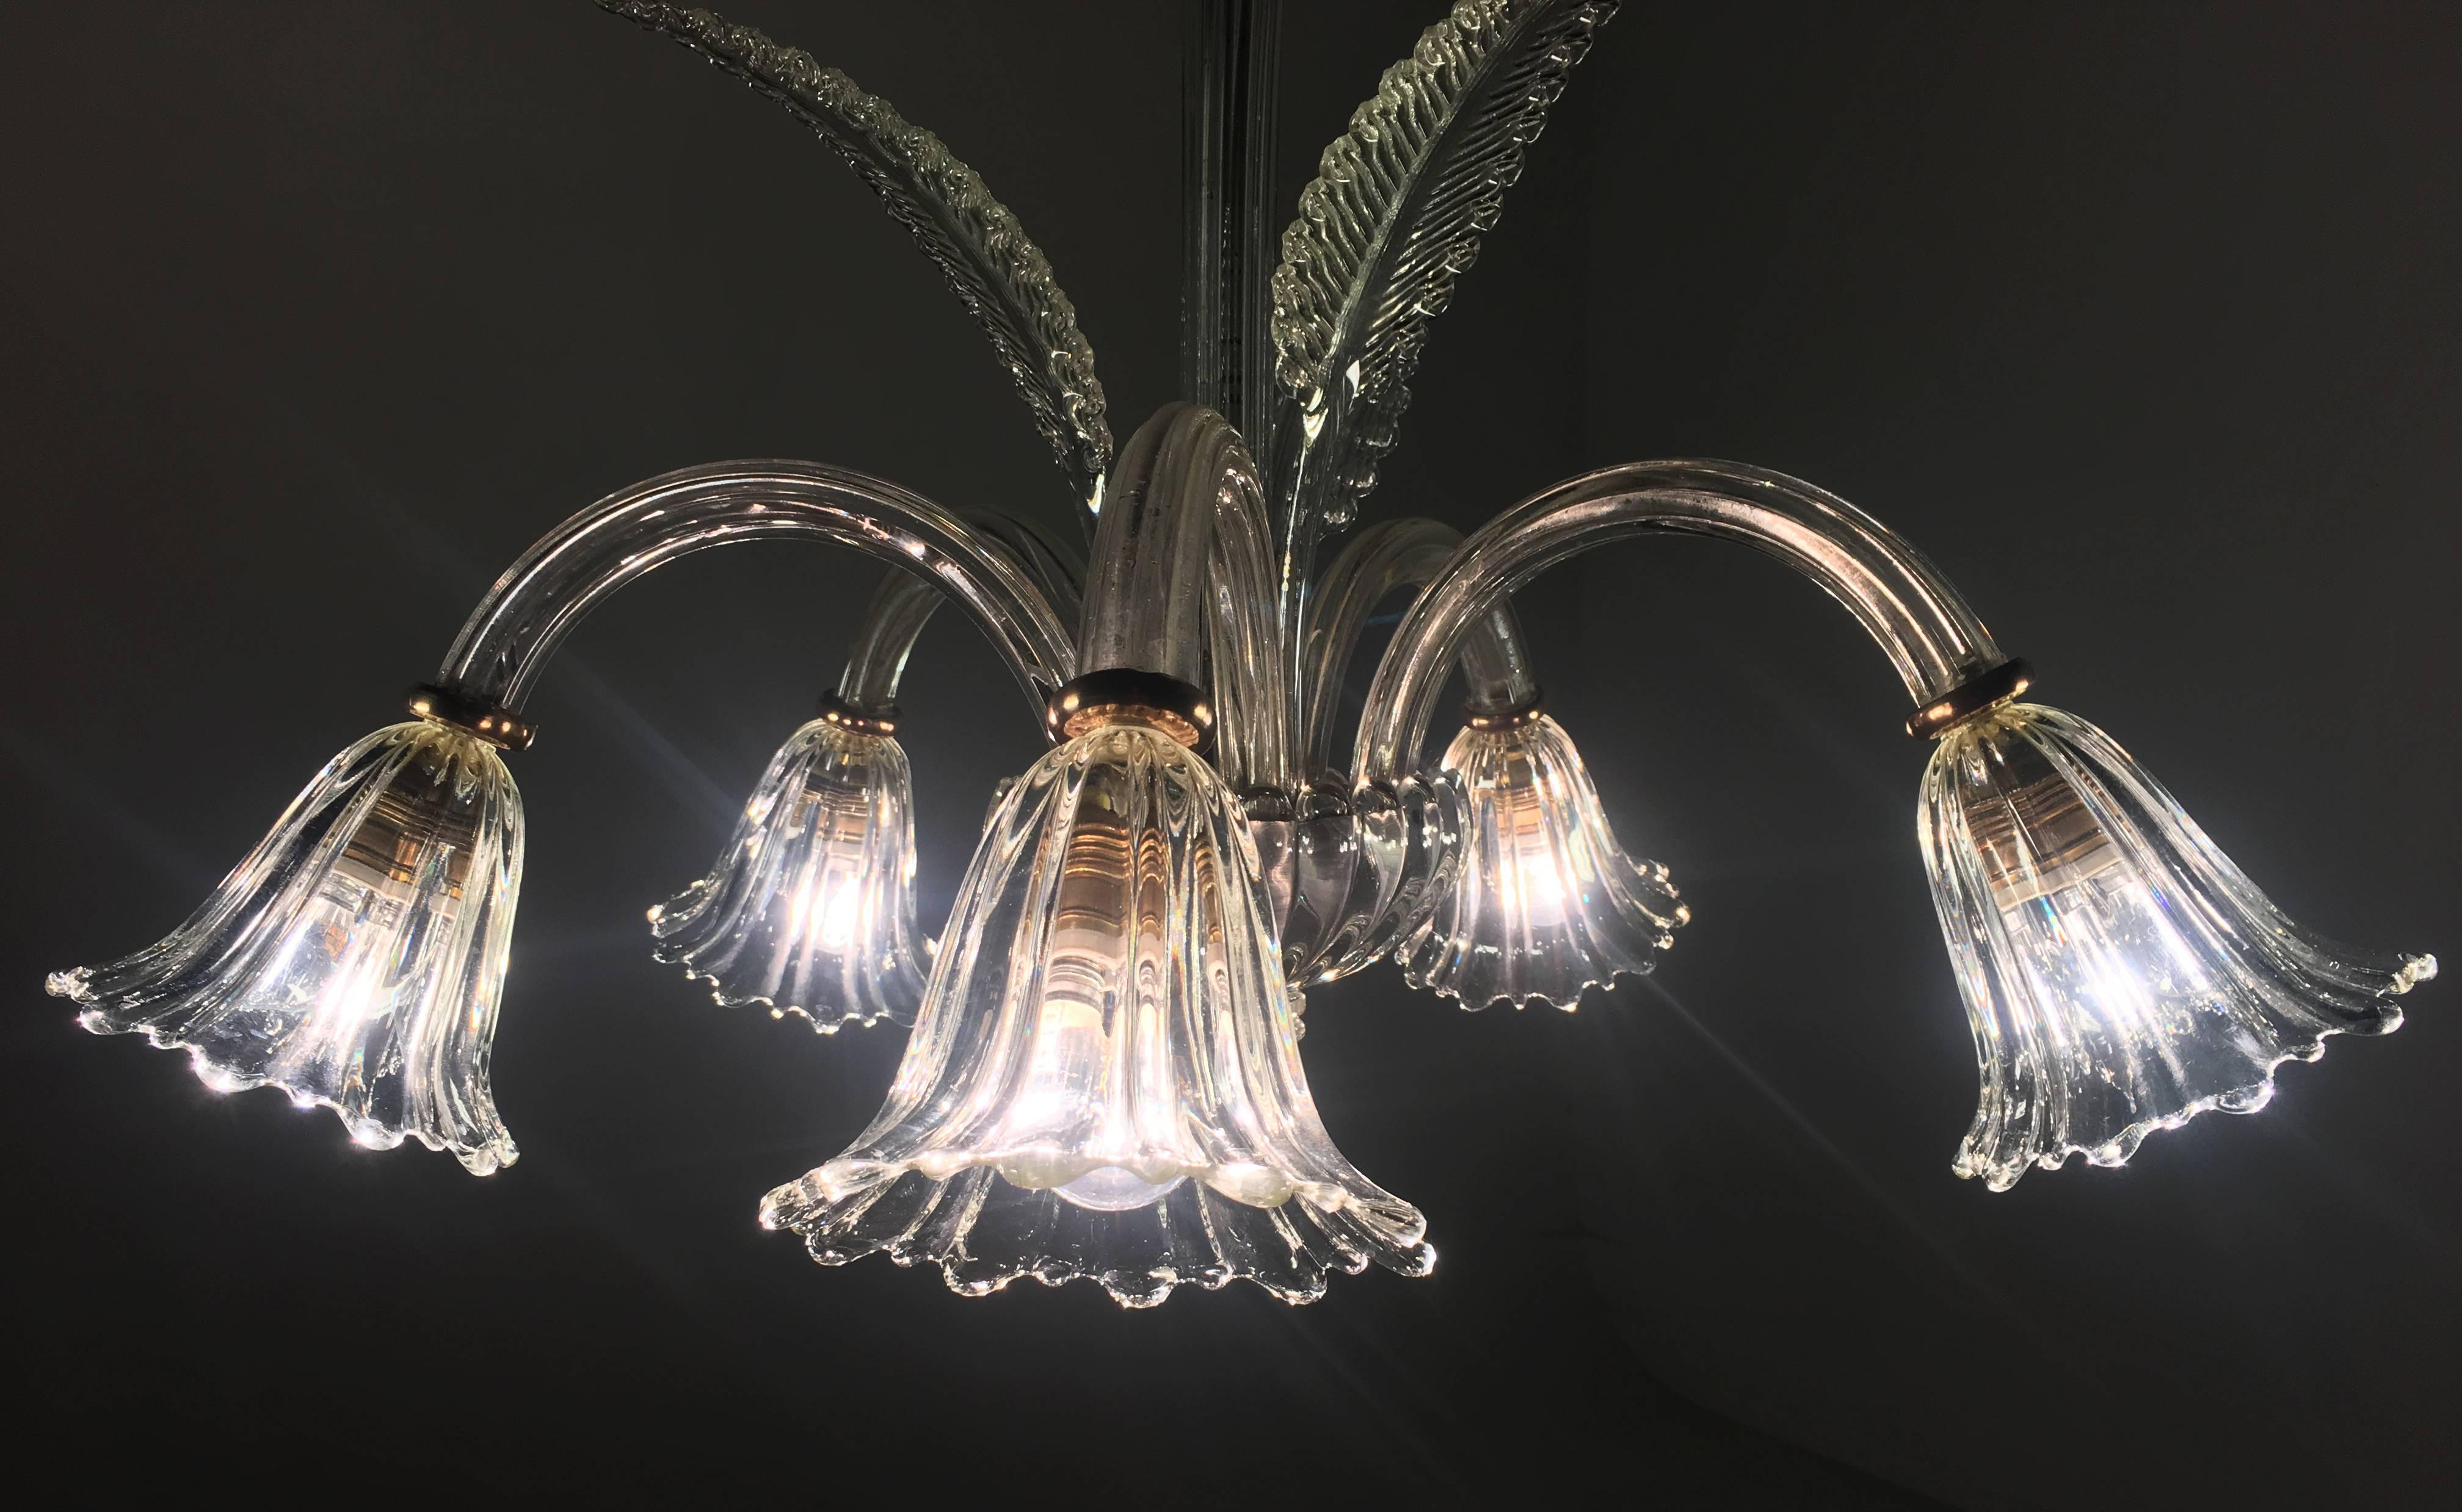 20th Century Liberty Chandelier by Ercole Barovier, Murano, 1940s For Sale